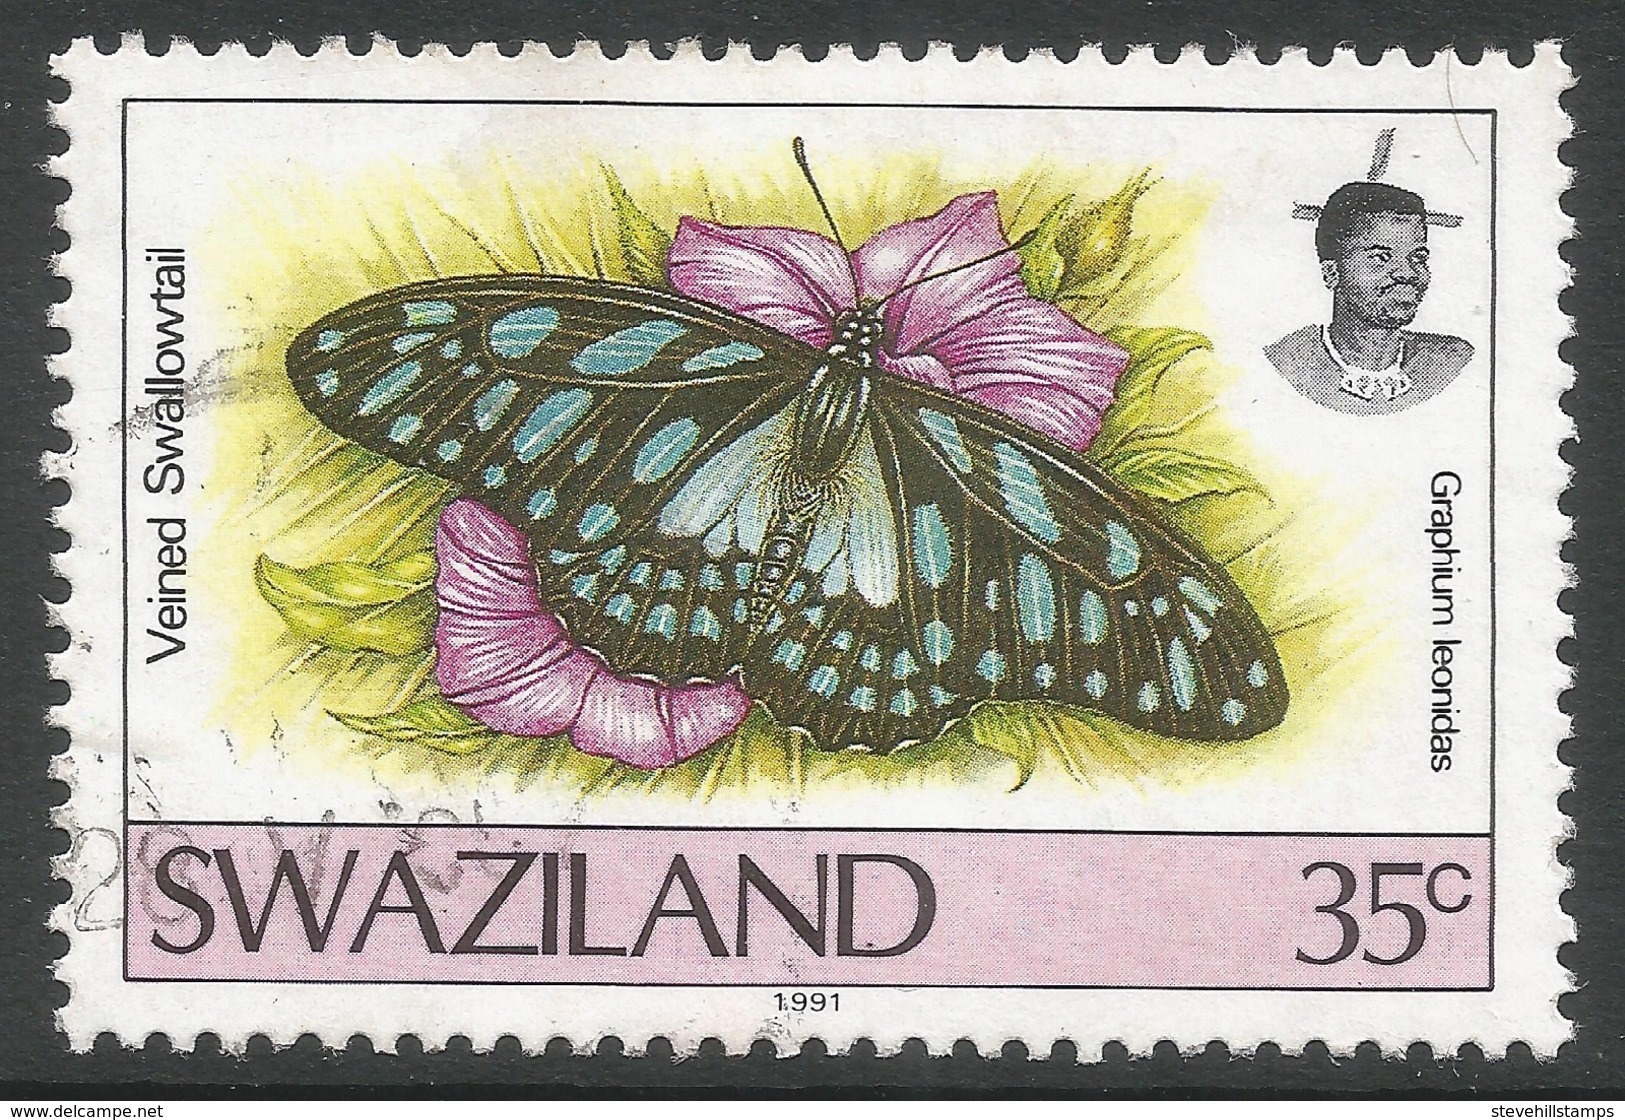 Swaziland. 1992 Butterflies (2nd Series). 35c Used. SG 613 - Swaziland (1968-...)